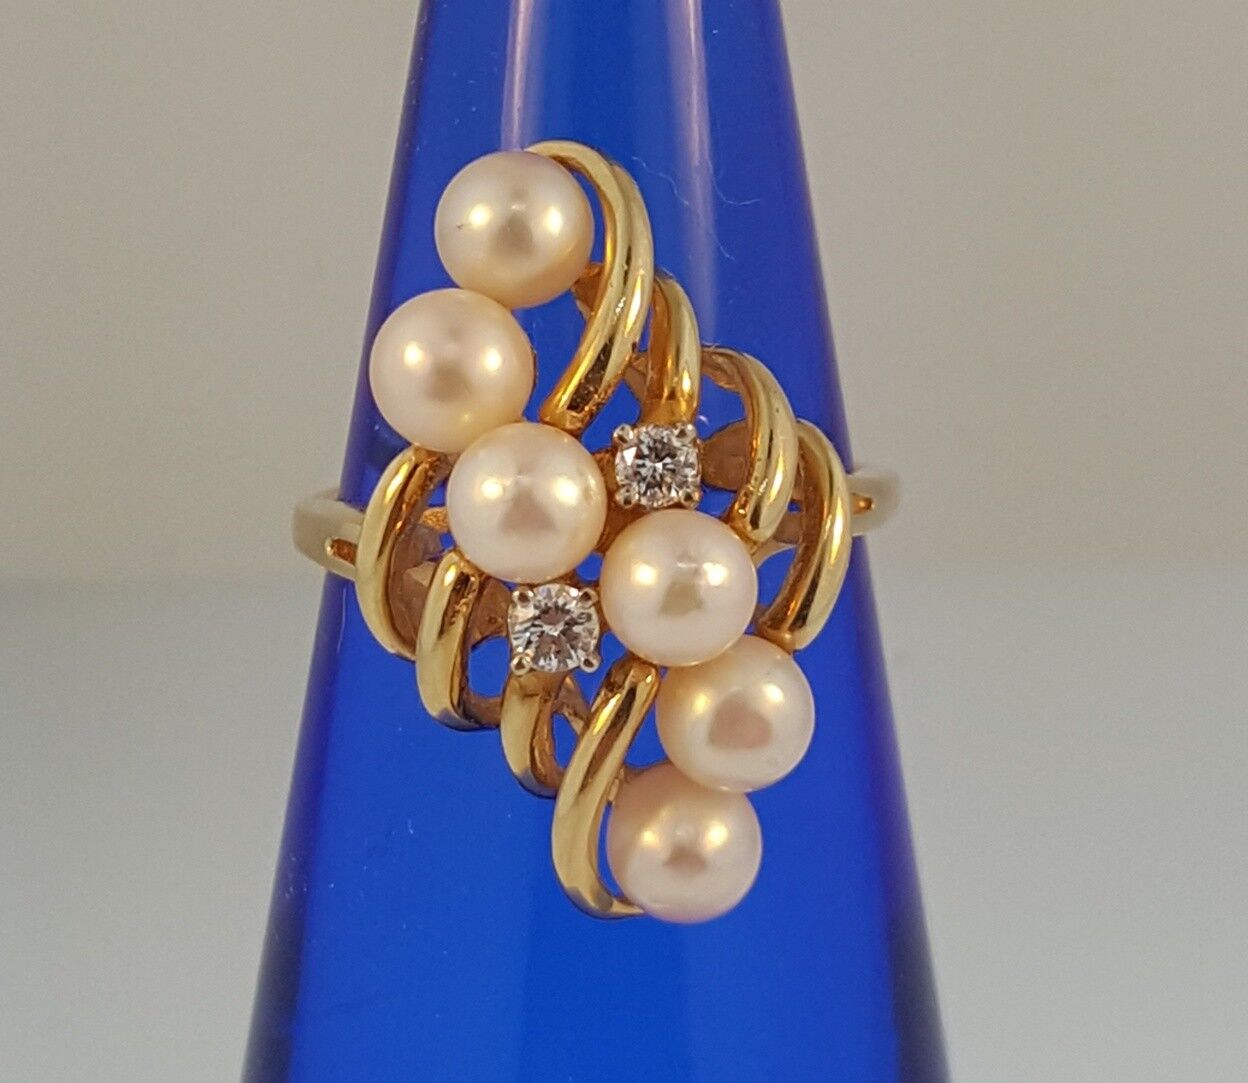 Have one to sell? Sell now 14K Yellow Gold 4.5-5 mm 6 Pearl Cluster and 2 Diamond Ring Size 5.5